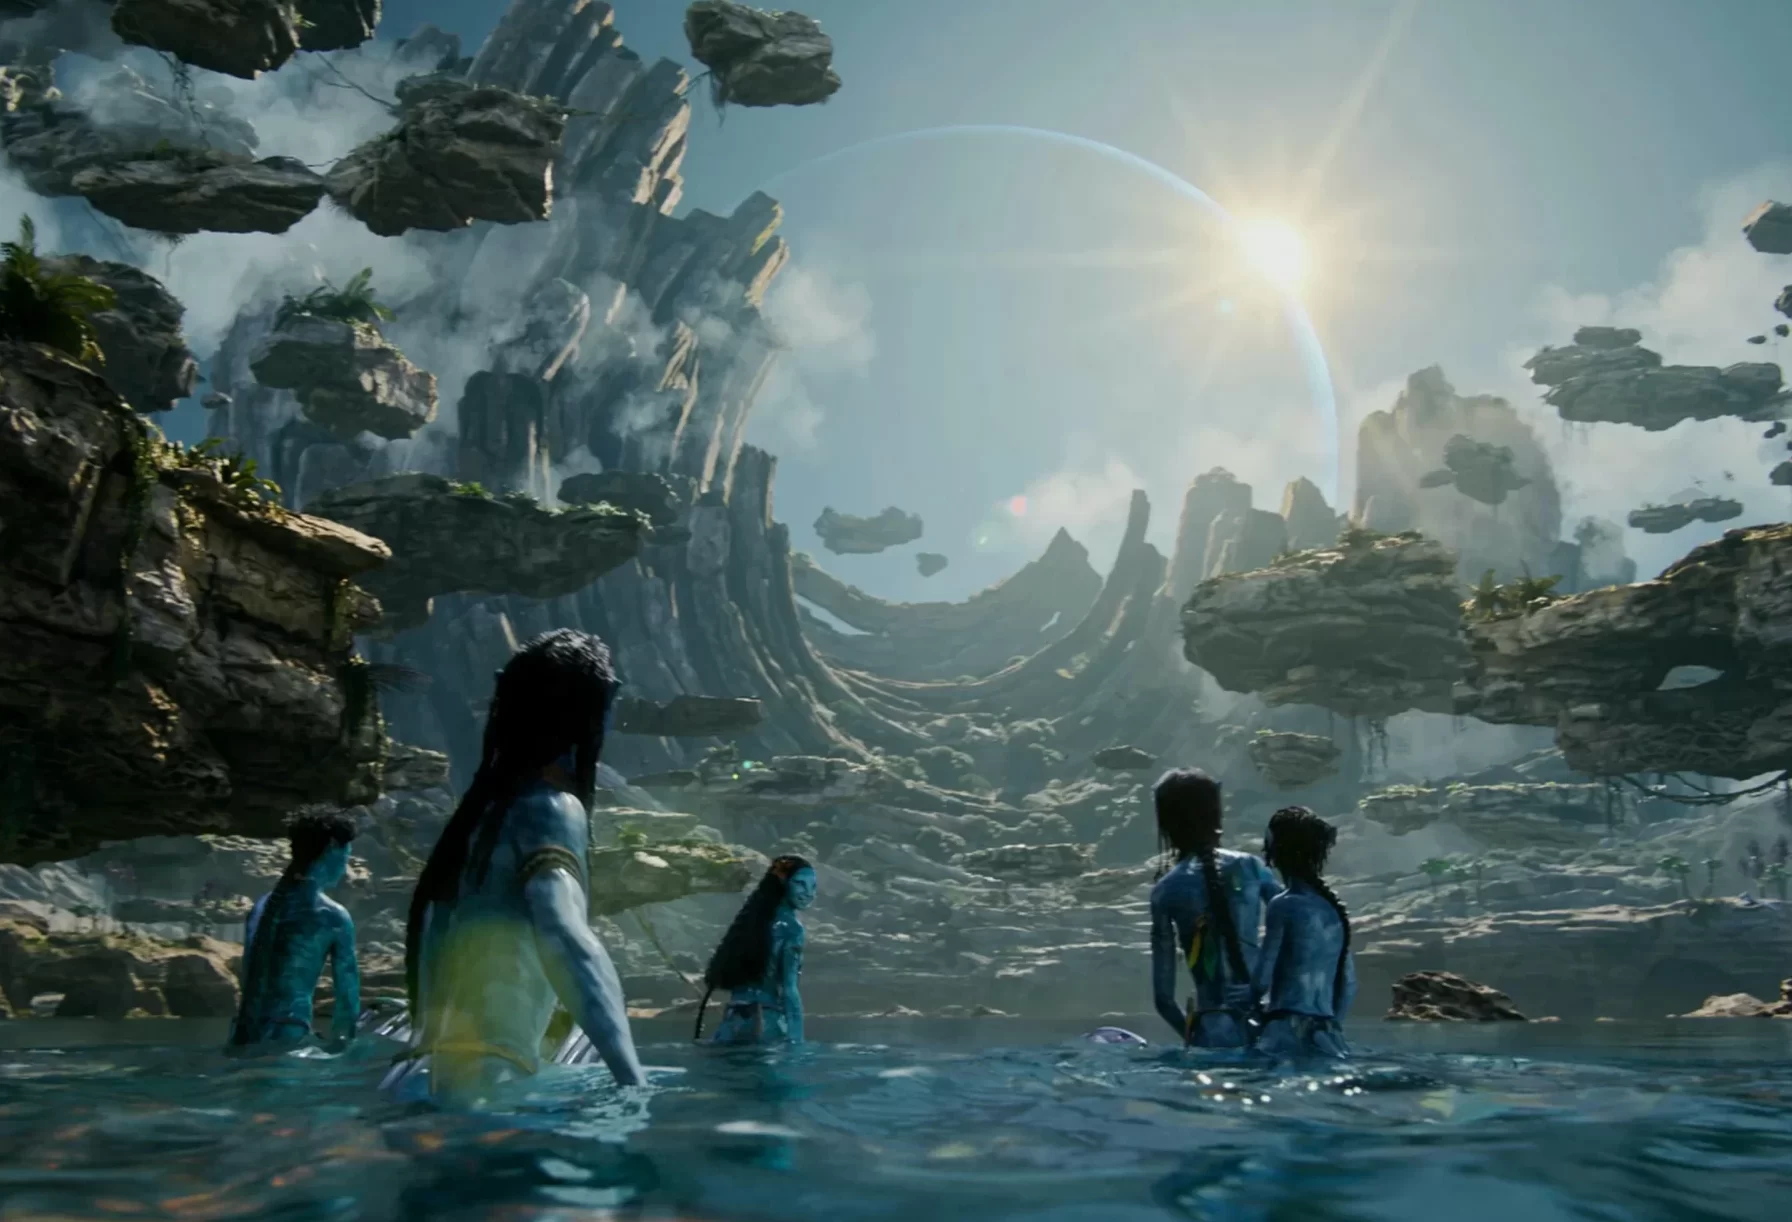 In an article about 'Avatar: The Way of Water,' the Navi people look up at the sun from the sea below.